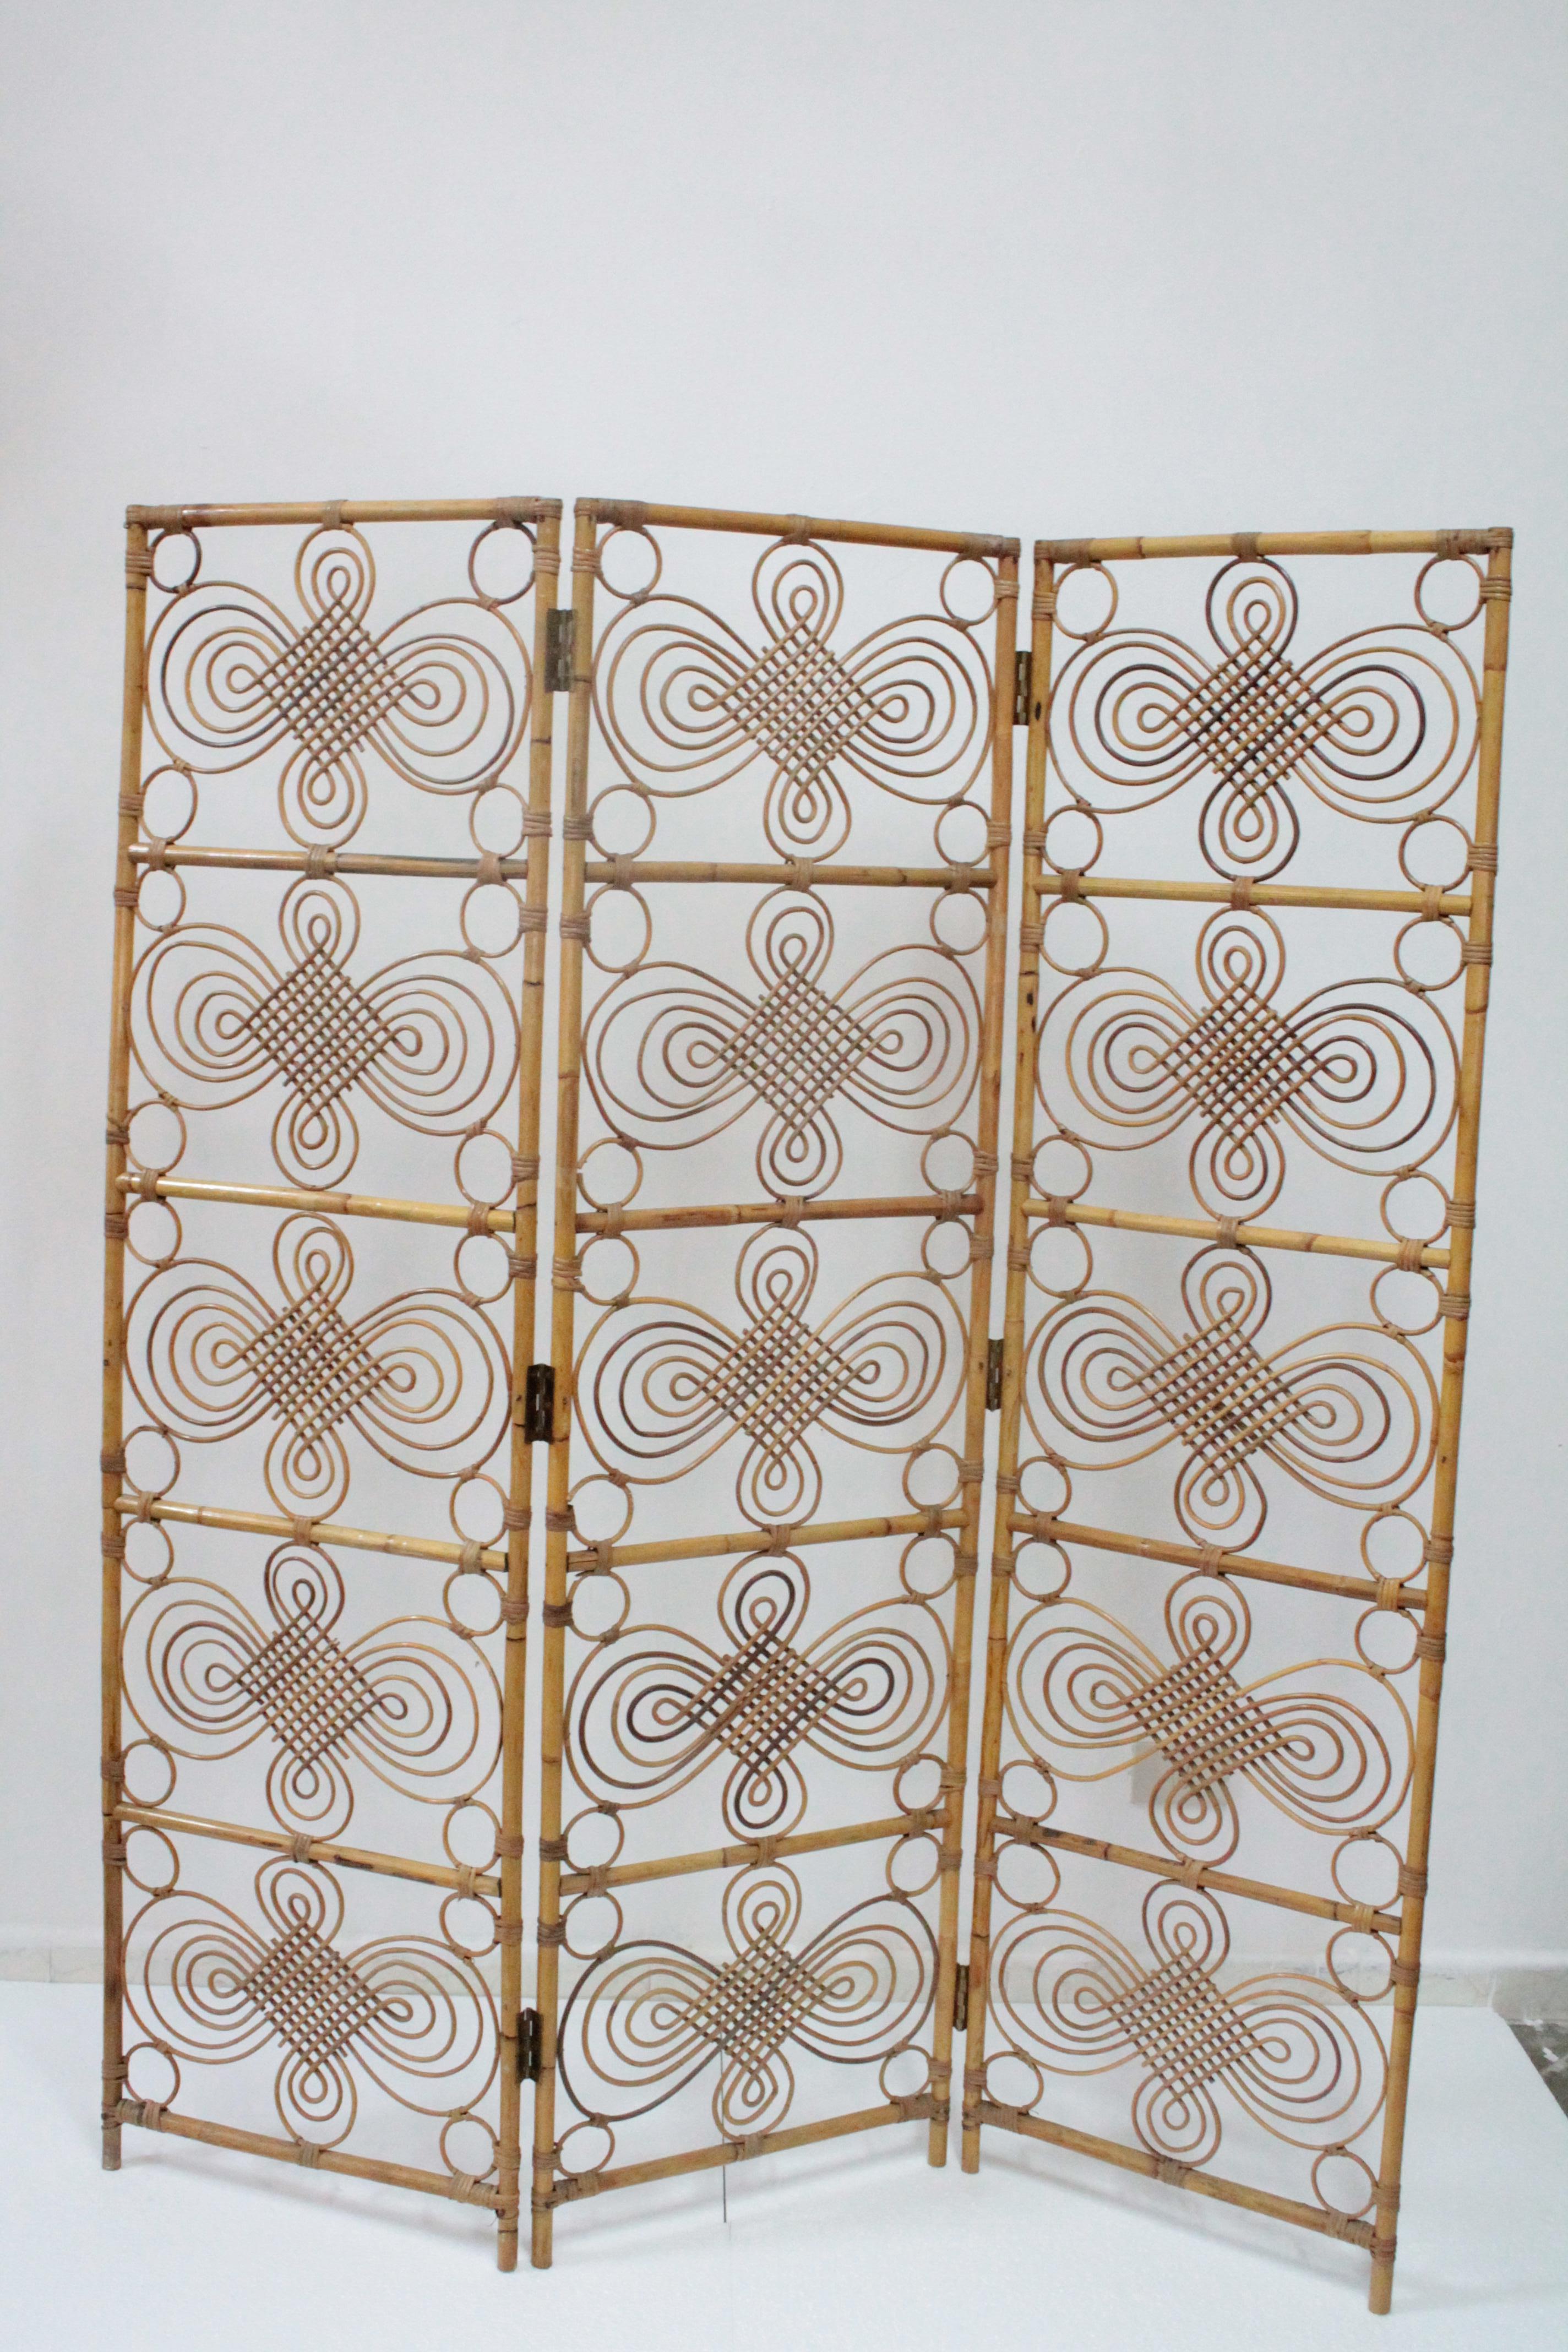 Decorative Italian Vintage Bamboo/Wicker Room Divider, 1970s For Sale 1